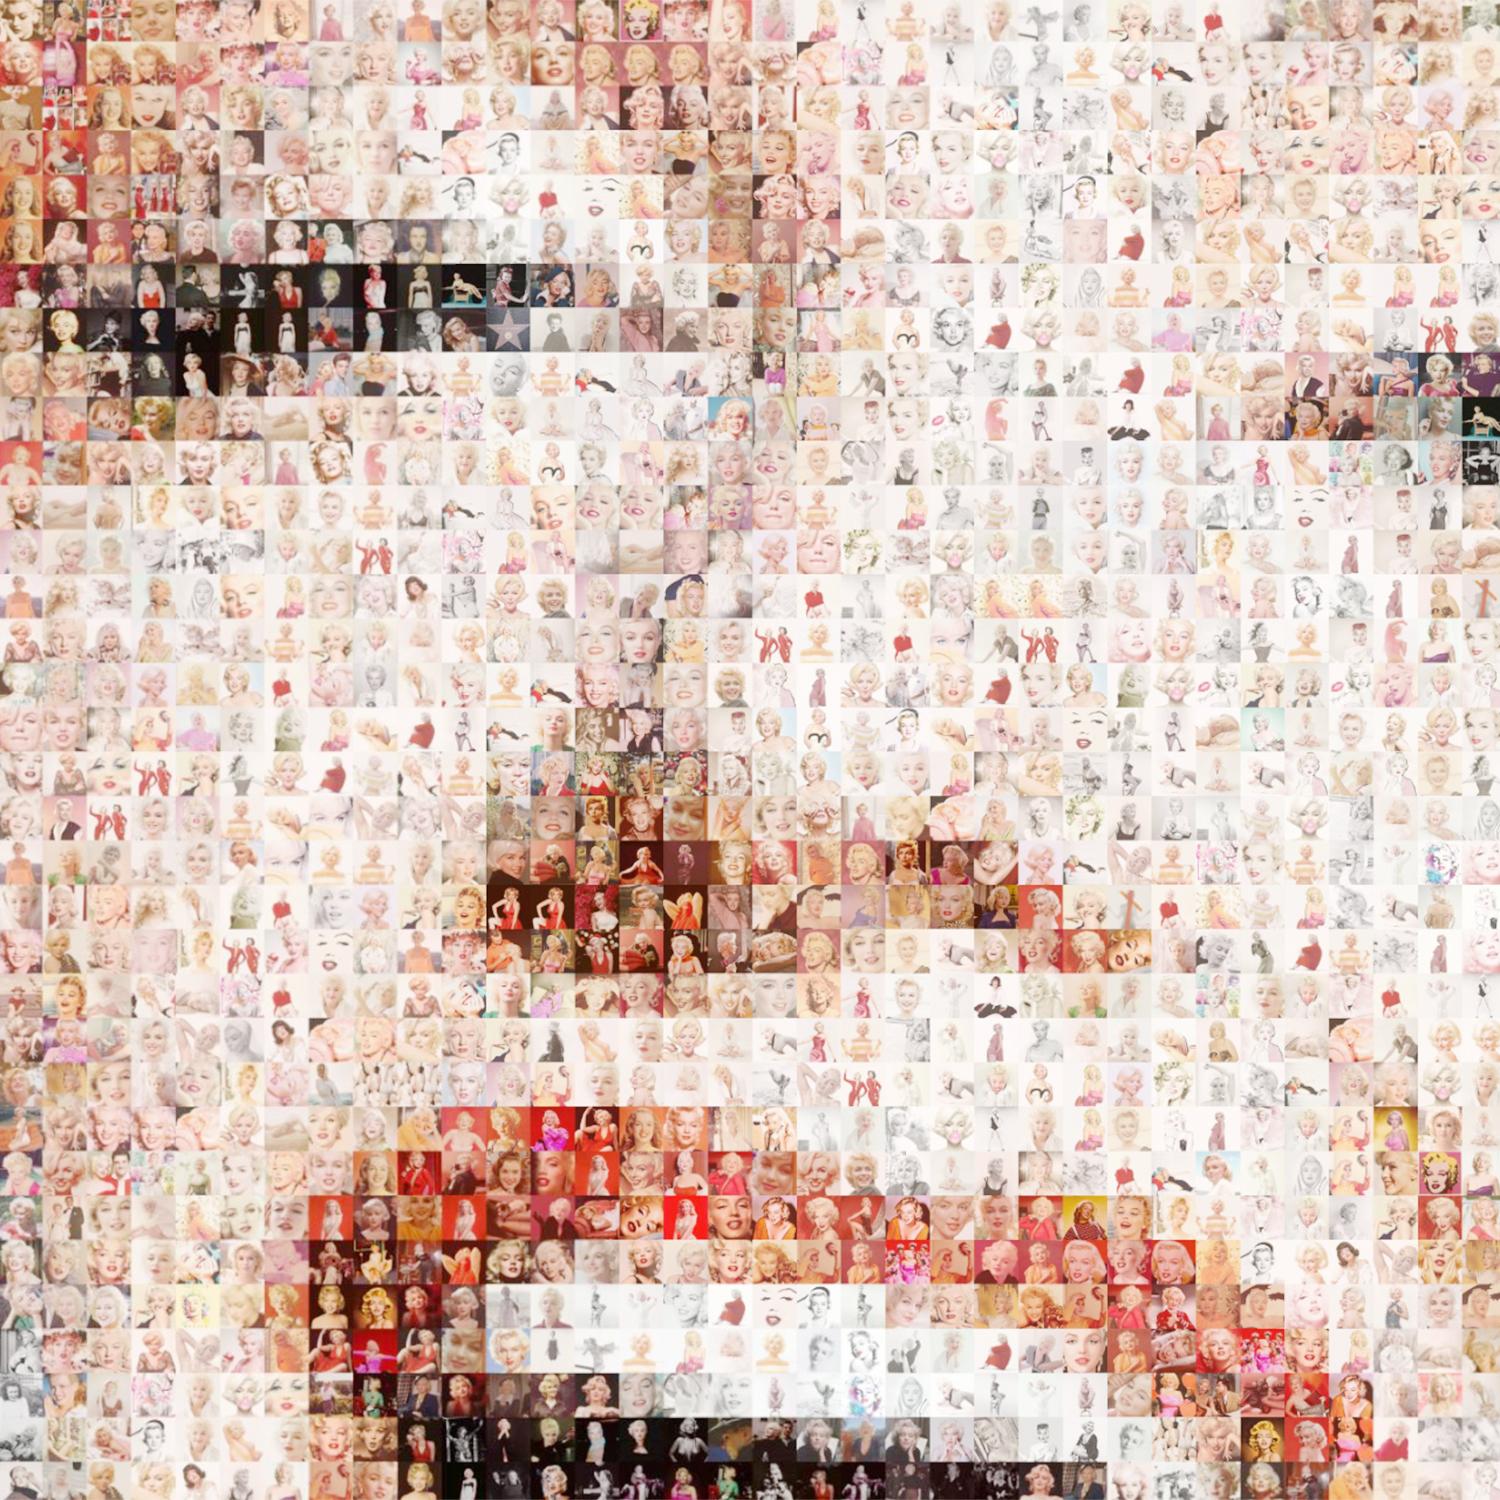 French Marylin Monroe Mosaic Photos For Sale